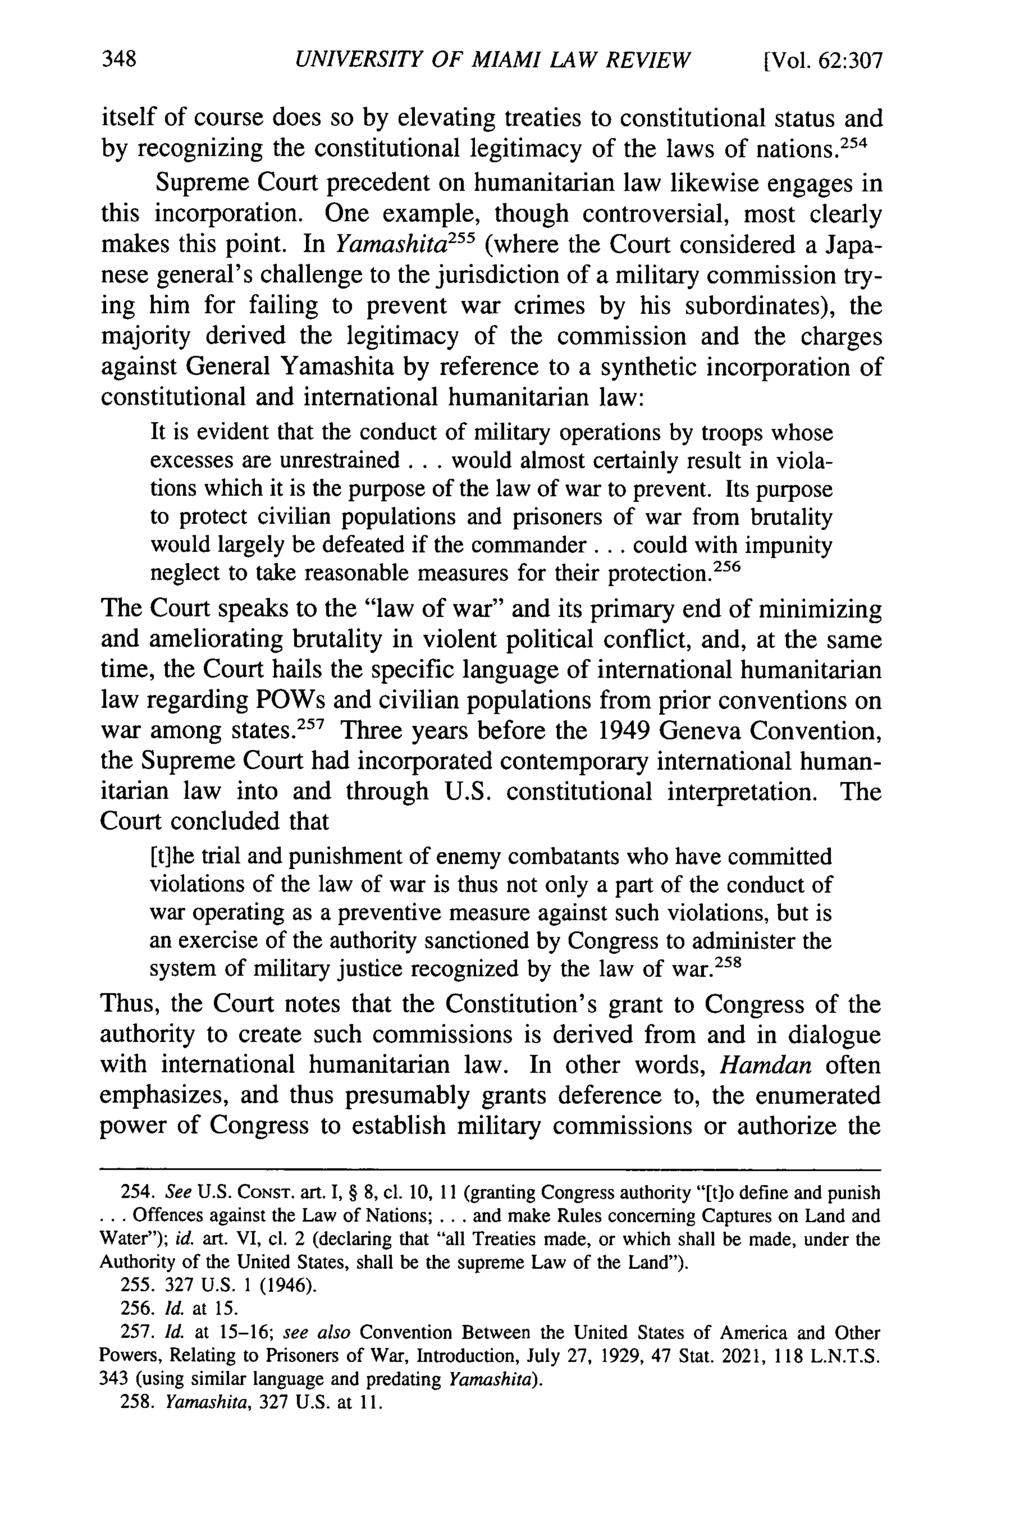 UNIVERSITY OF MIAMI LAW REVIEW [Vol. 62:307 itself of course does so by elevating treaties to constitutional status and by recognizing the constitutional legitimacy of the laws of nations.